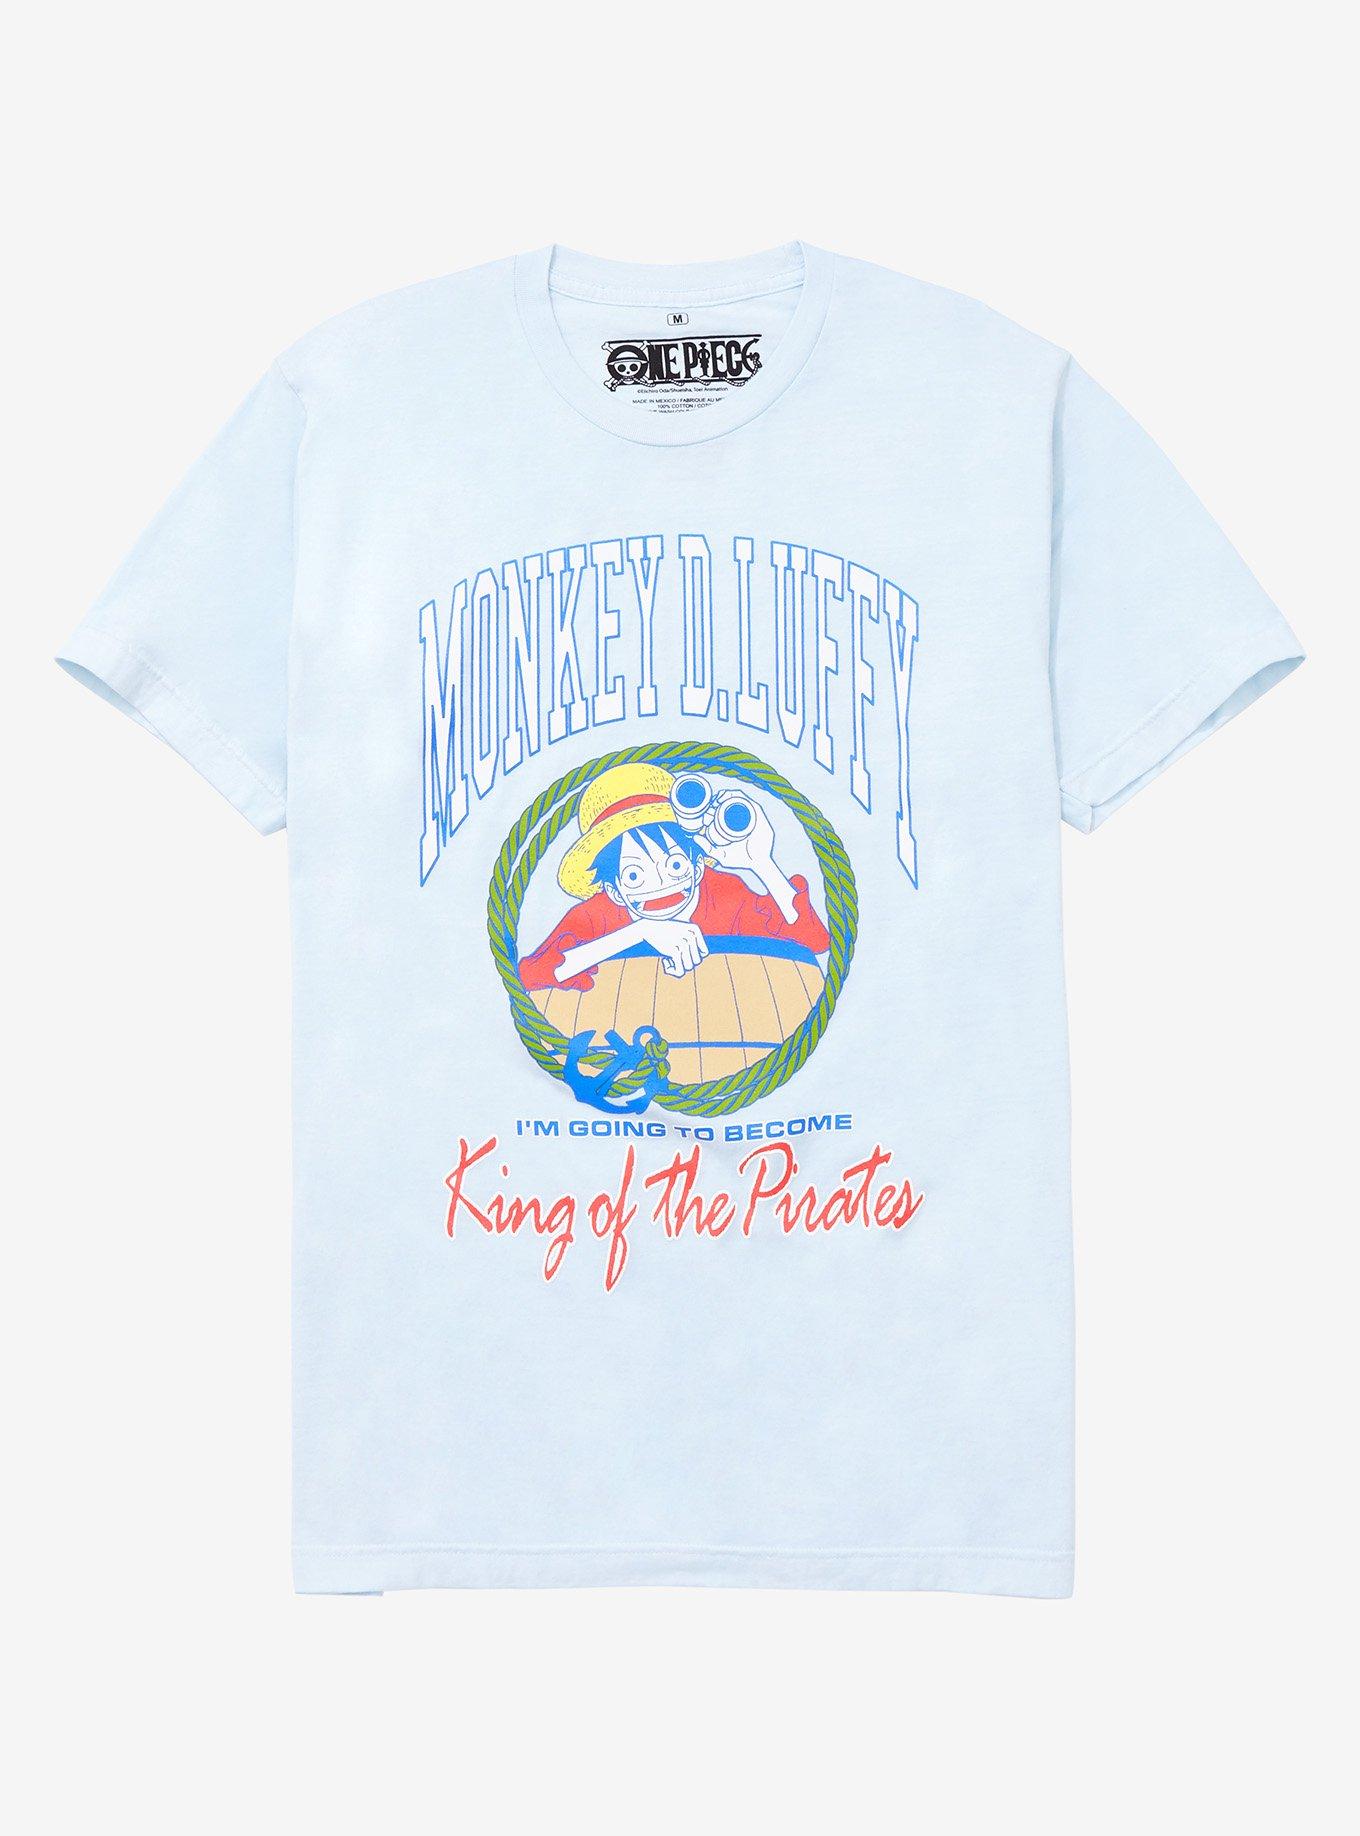 One Piece Monkey D. Luffy King of the Pirates T-Shirt - BoxLunch Exclusive, LIGHT BLUE, hi-res